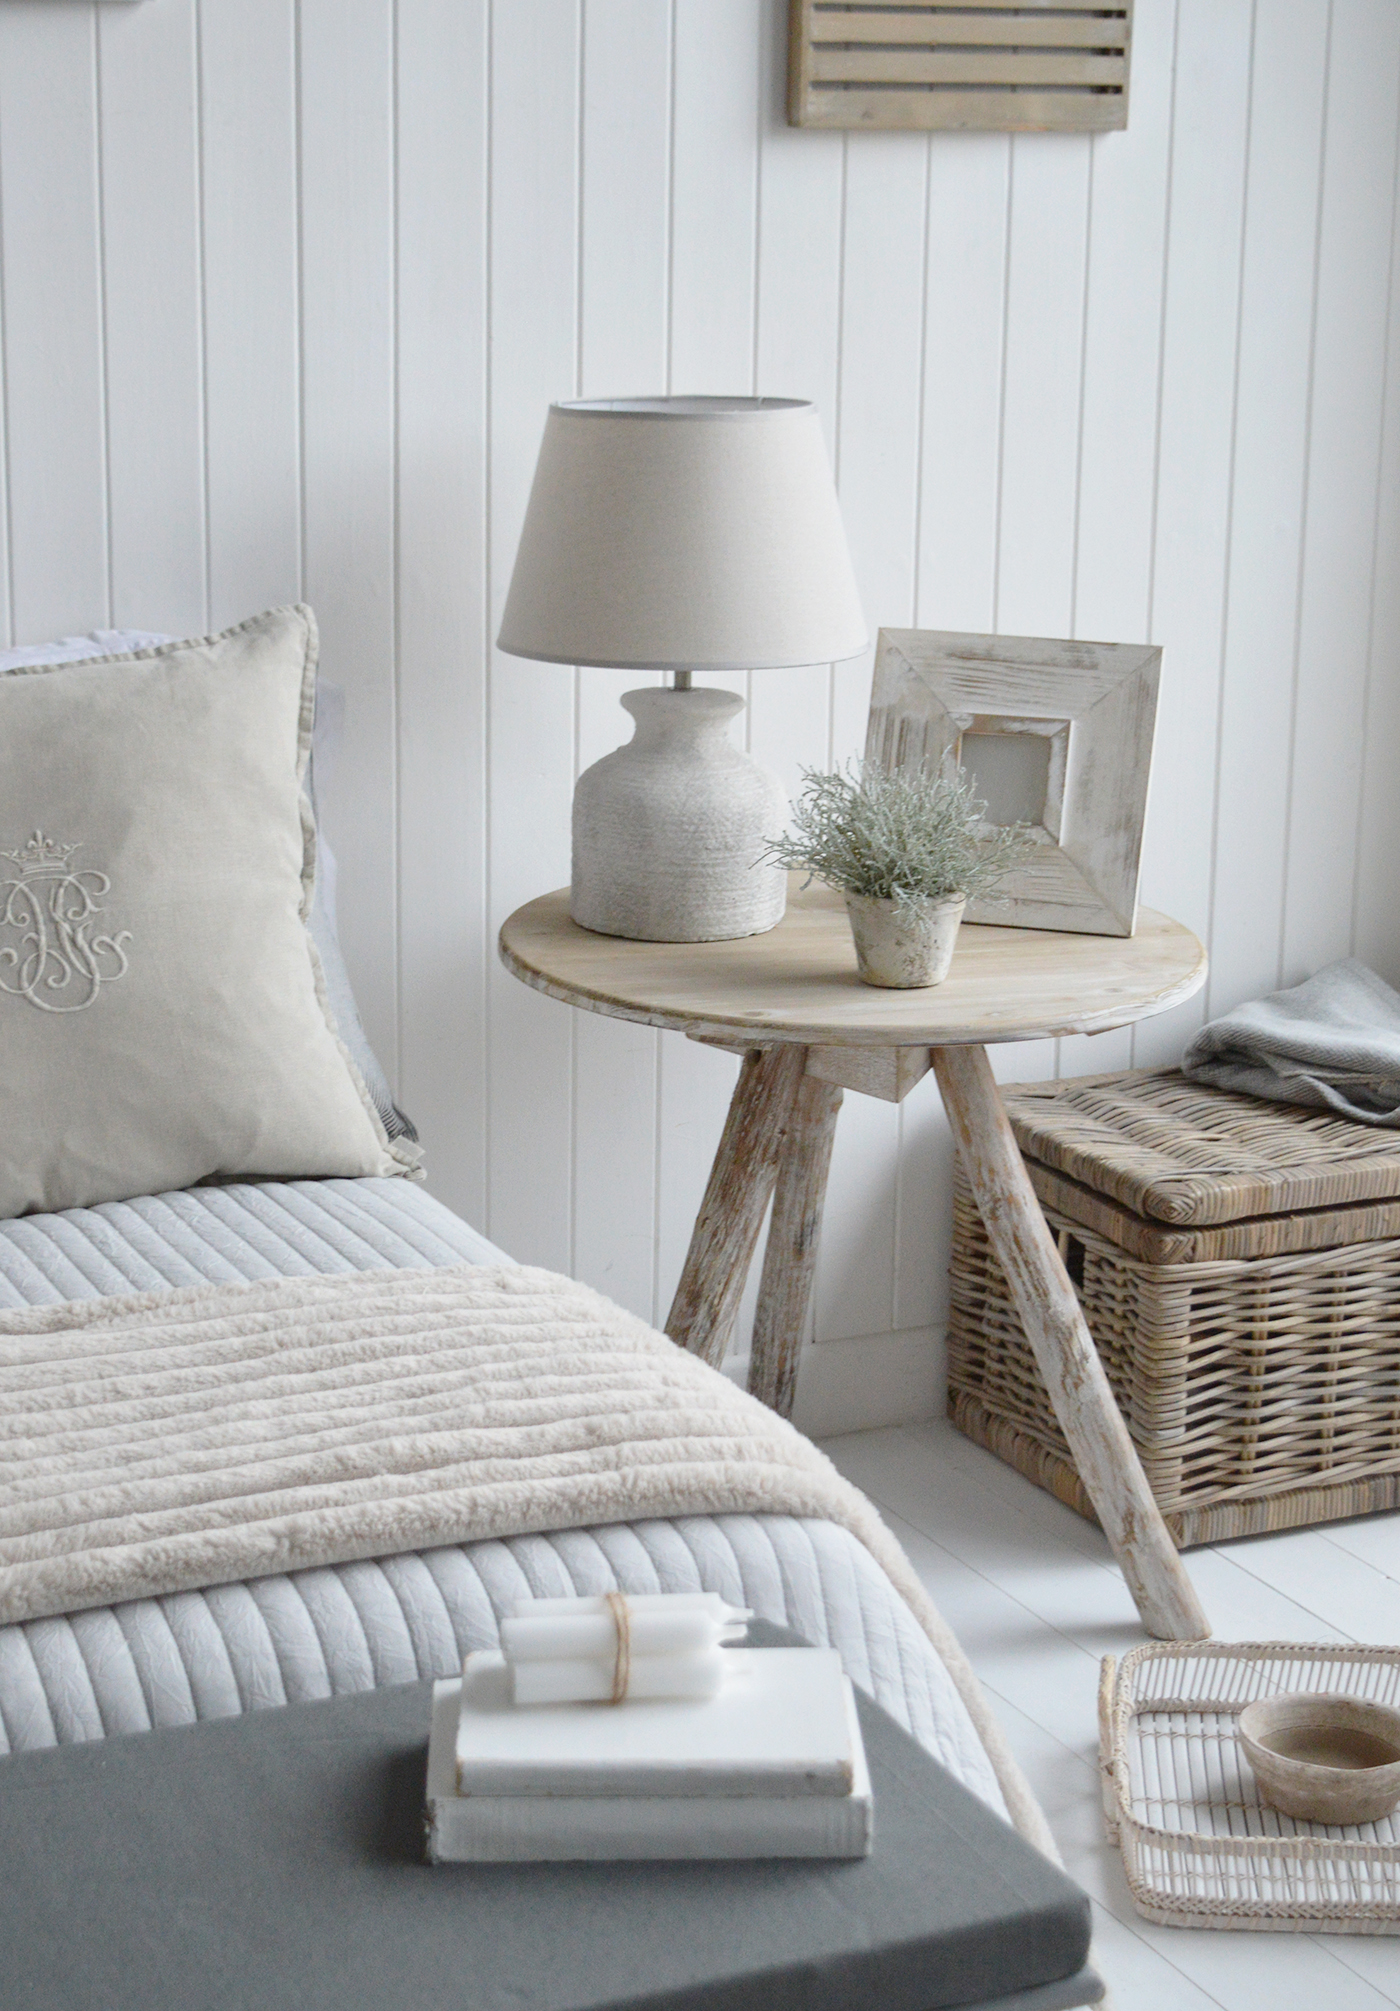 The Driftwood table as a bedside in a coastally inspired bedroom